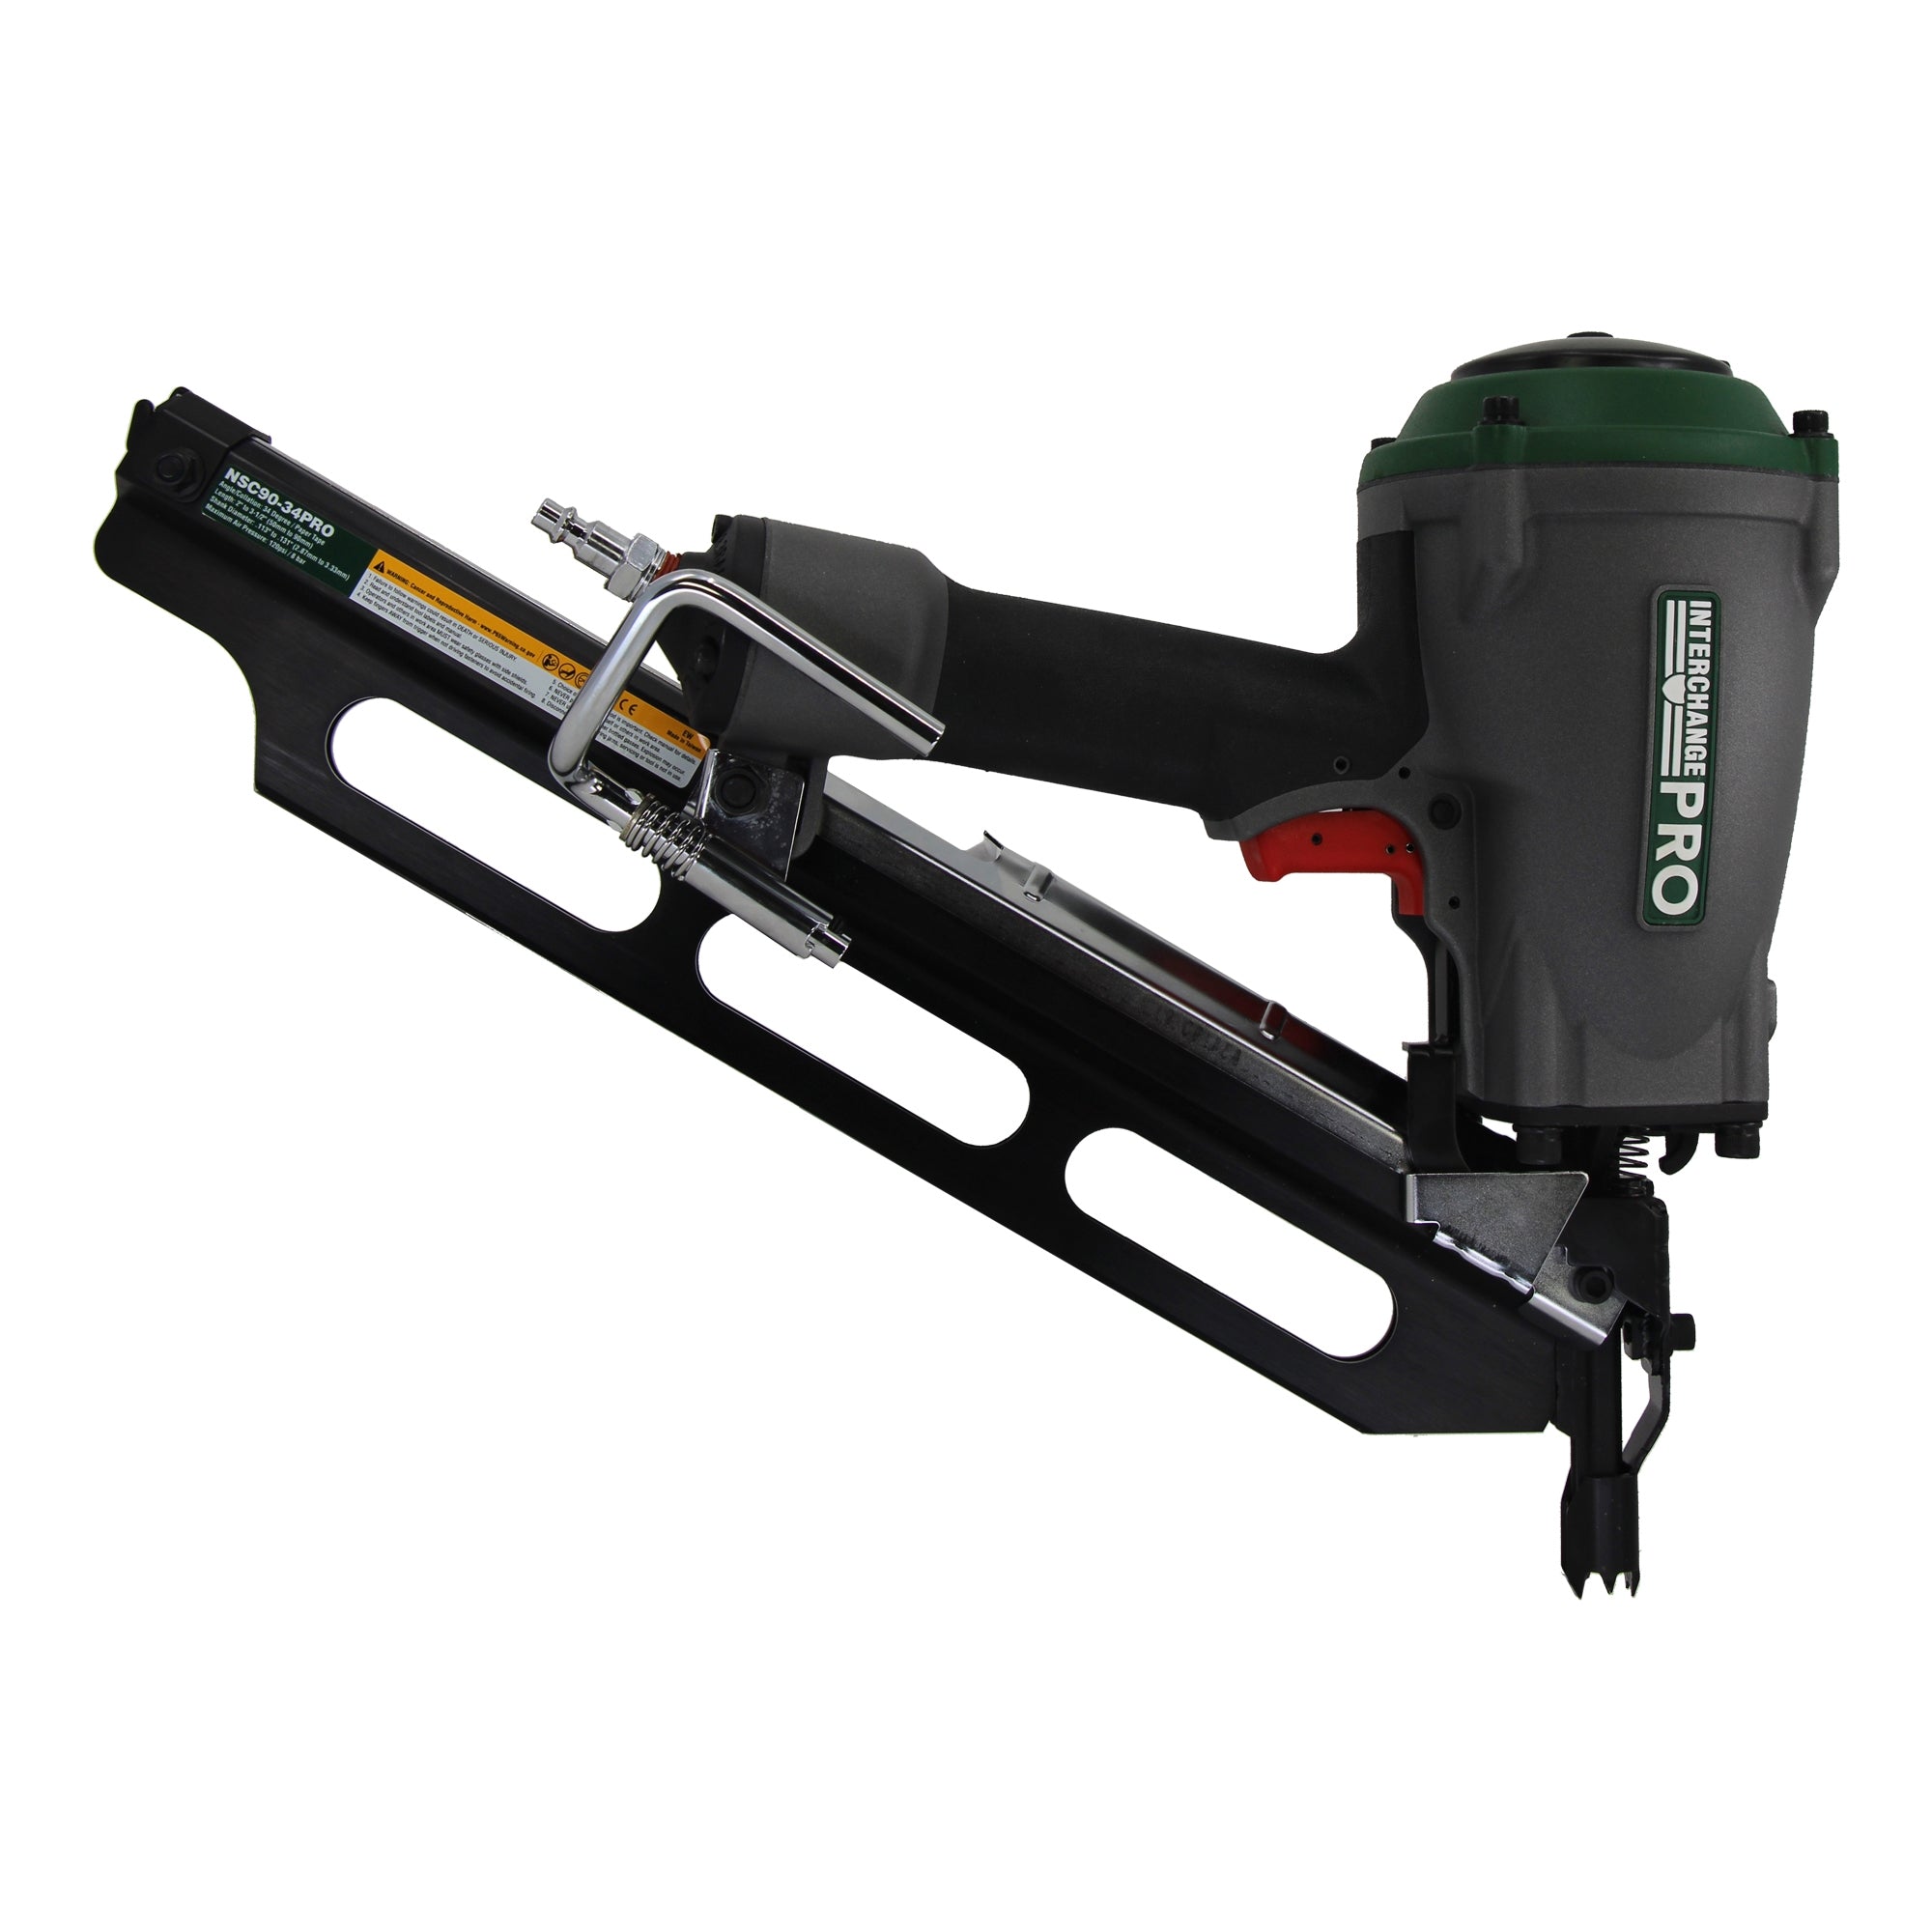 Interchange Pro NSC90-34PRO  34-Degree 3-1/4" Paper Tape Collated Clipped Head Heavy Duty Framing Nailer with Adjustable Depth of Drive